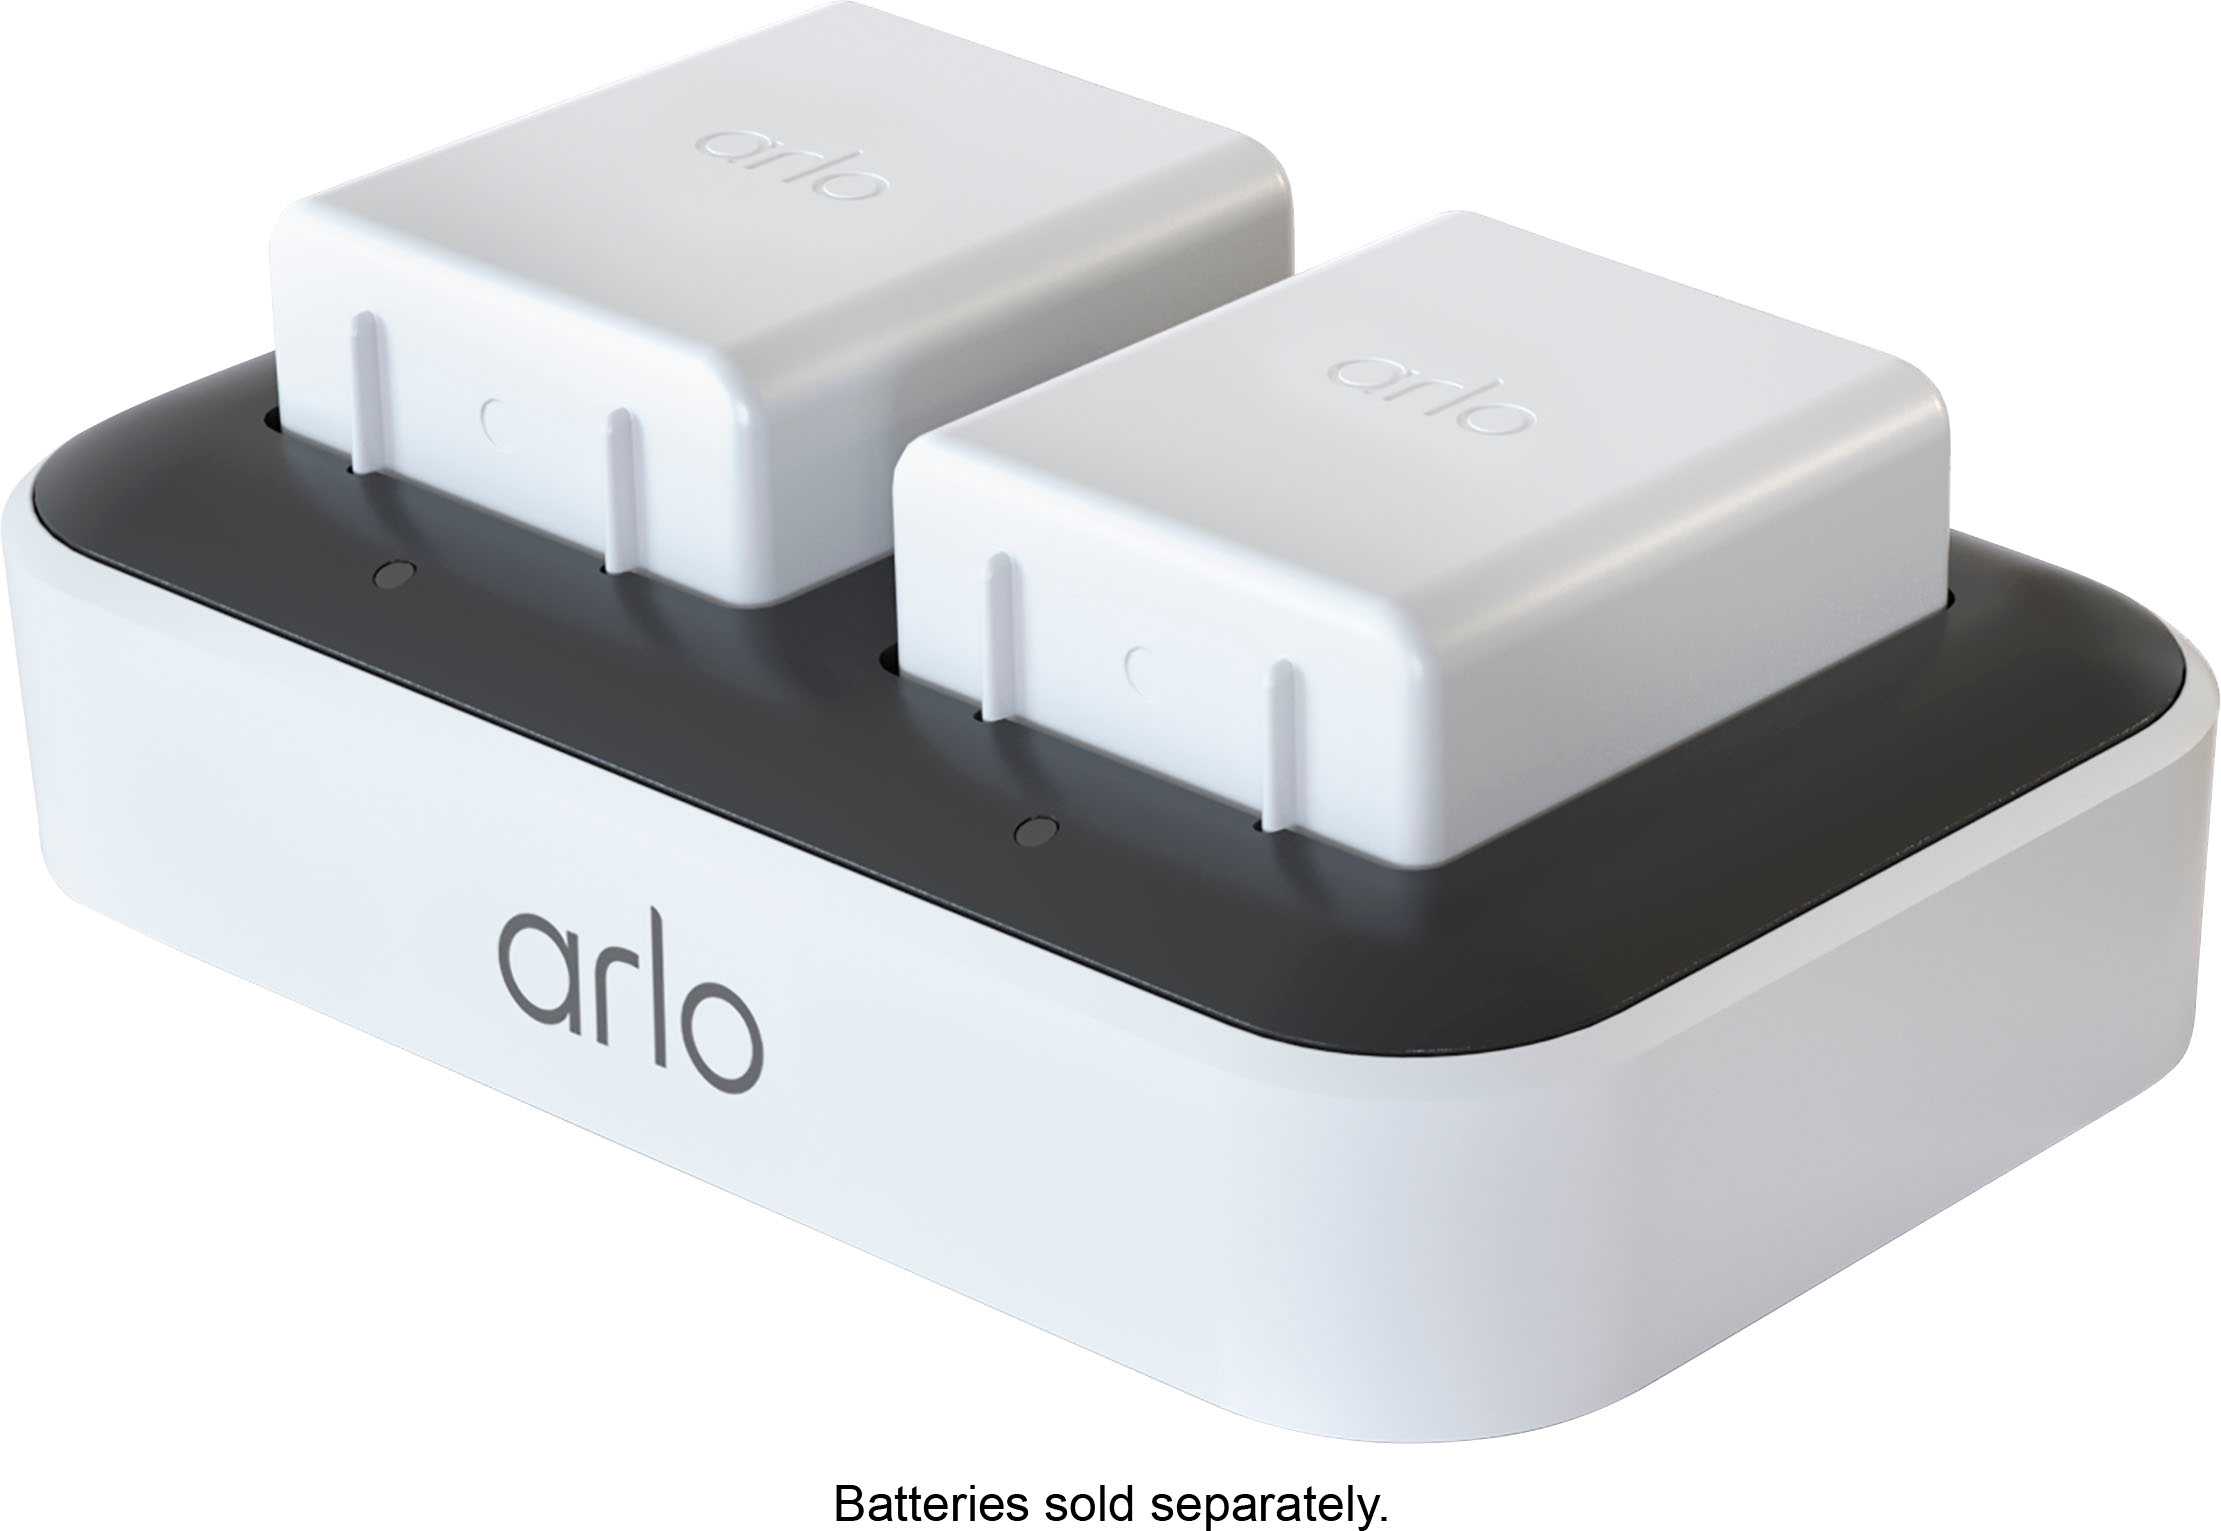 Arlo Go and Arlo Security Light Batteries Arlo Pro 2 and Dual Quick Charger for Arlo Pro Arlo Pro 2 Powerextra 2X Upgraded Rechargeable Battery Compatible with Arlo Pro